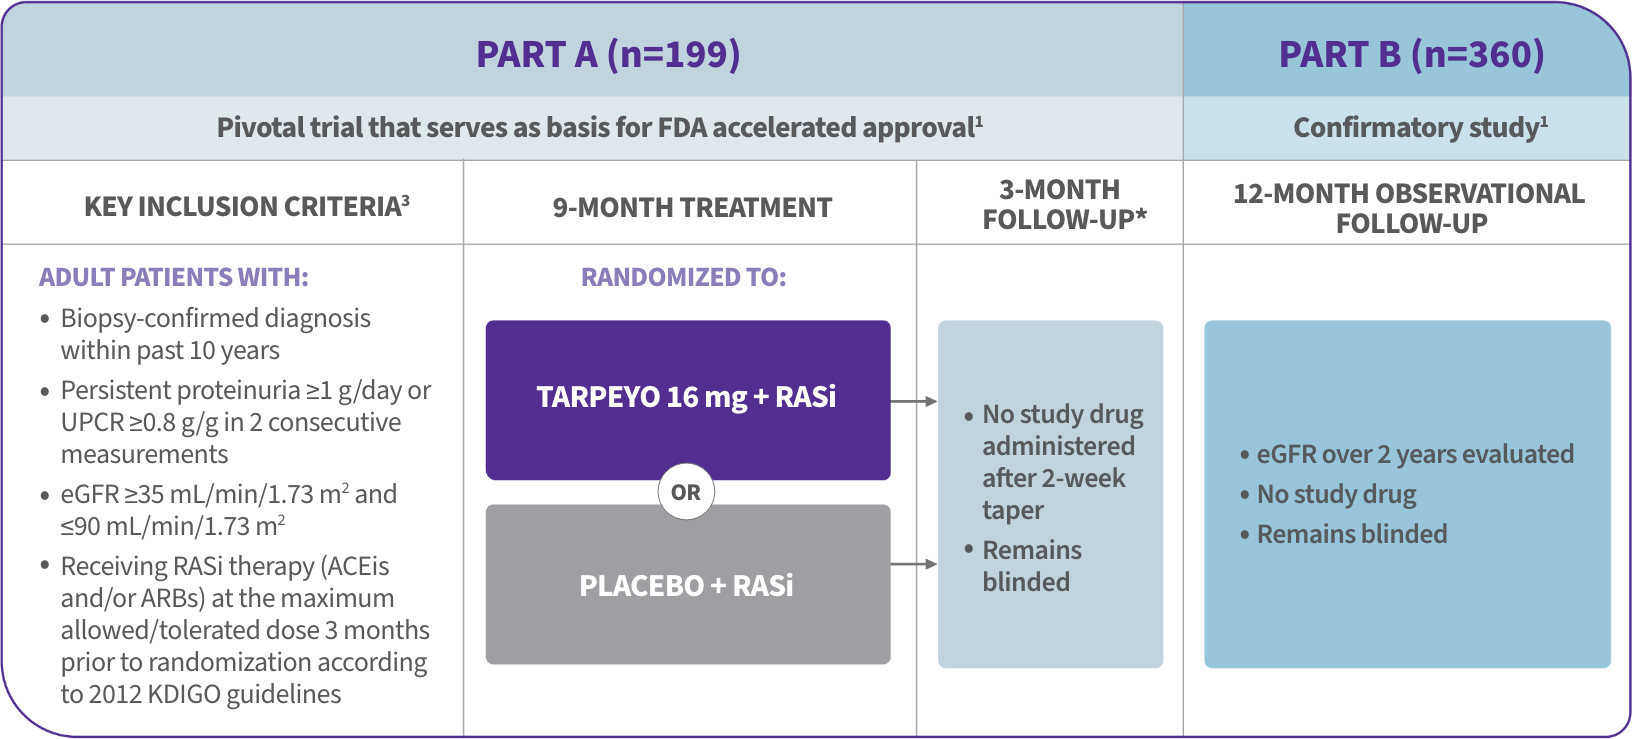 The chart describes the efficacy study design of the Tarpeyo phase 3 trial